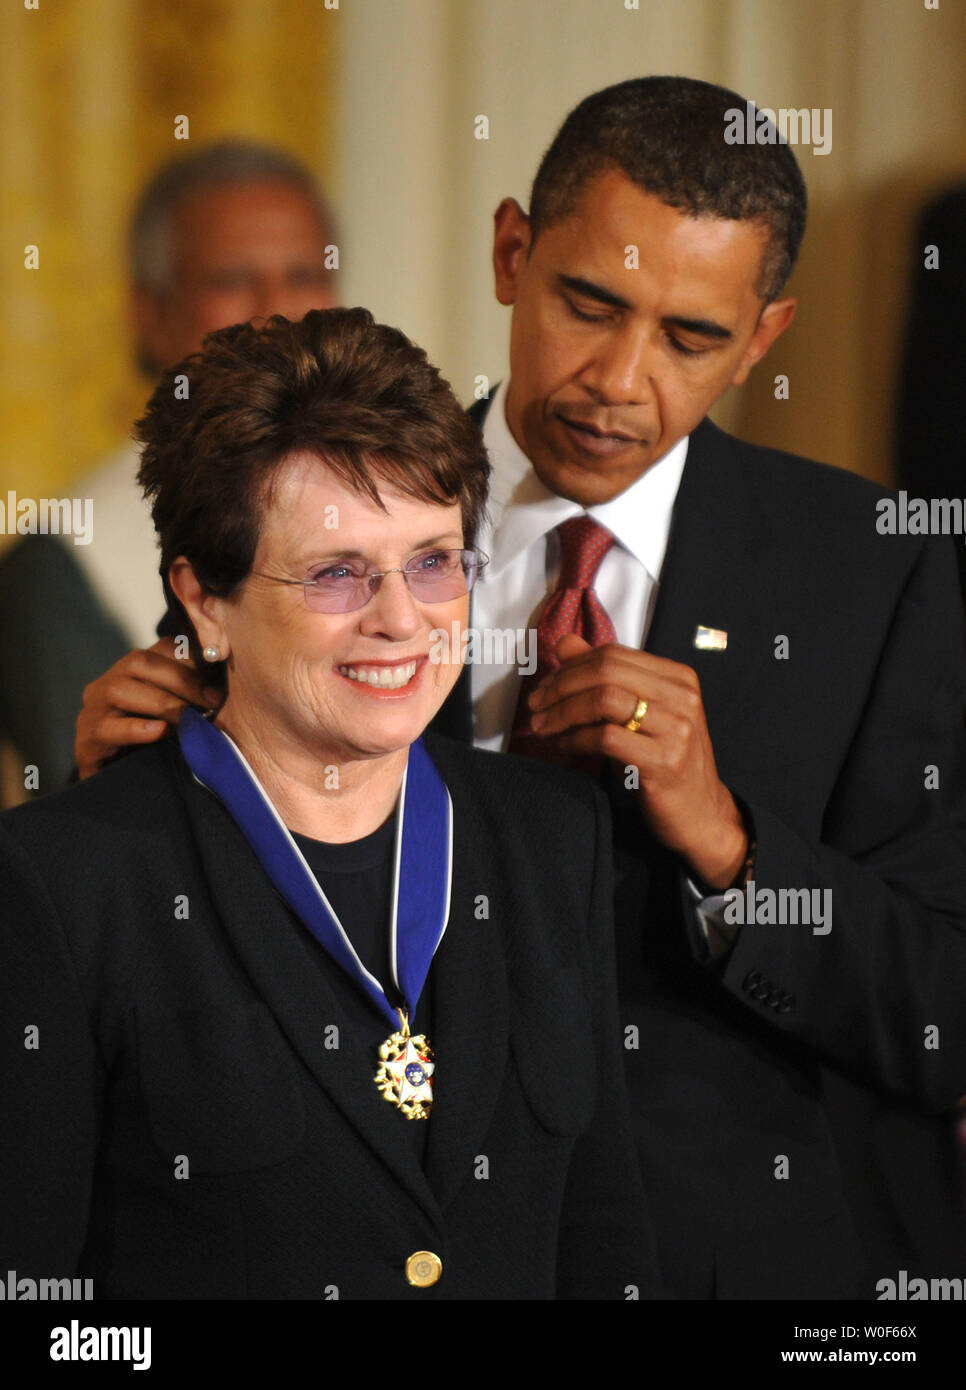 President Barack Obama presents the Presidential Medal of Freedom to Billie Jean King, at the White House in Washington on August 12, 2009.    UPI/Kevin Dietsch Stock Photo